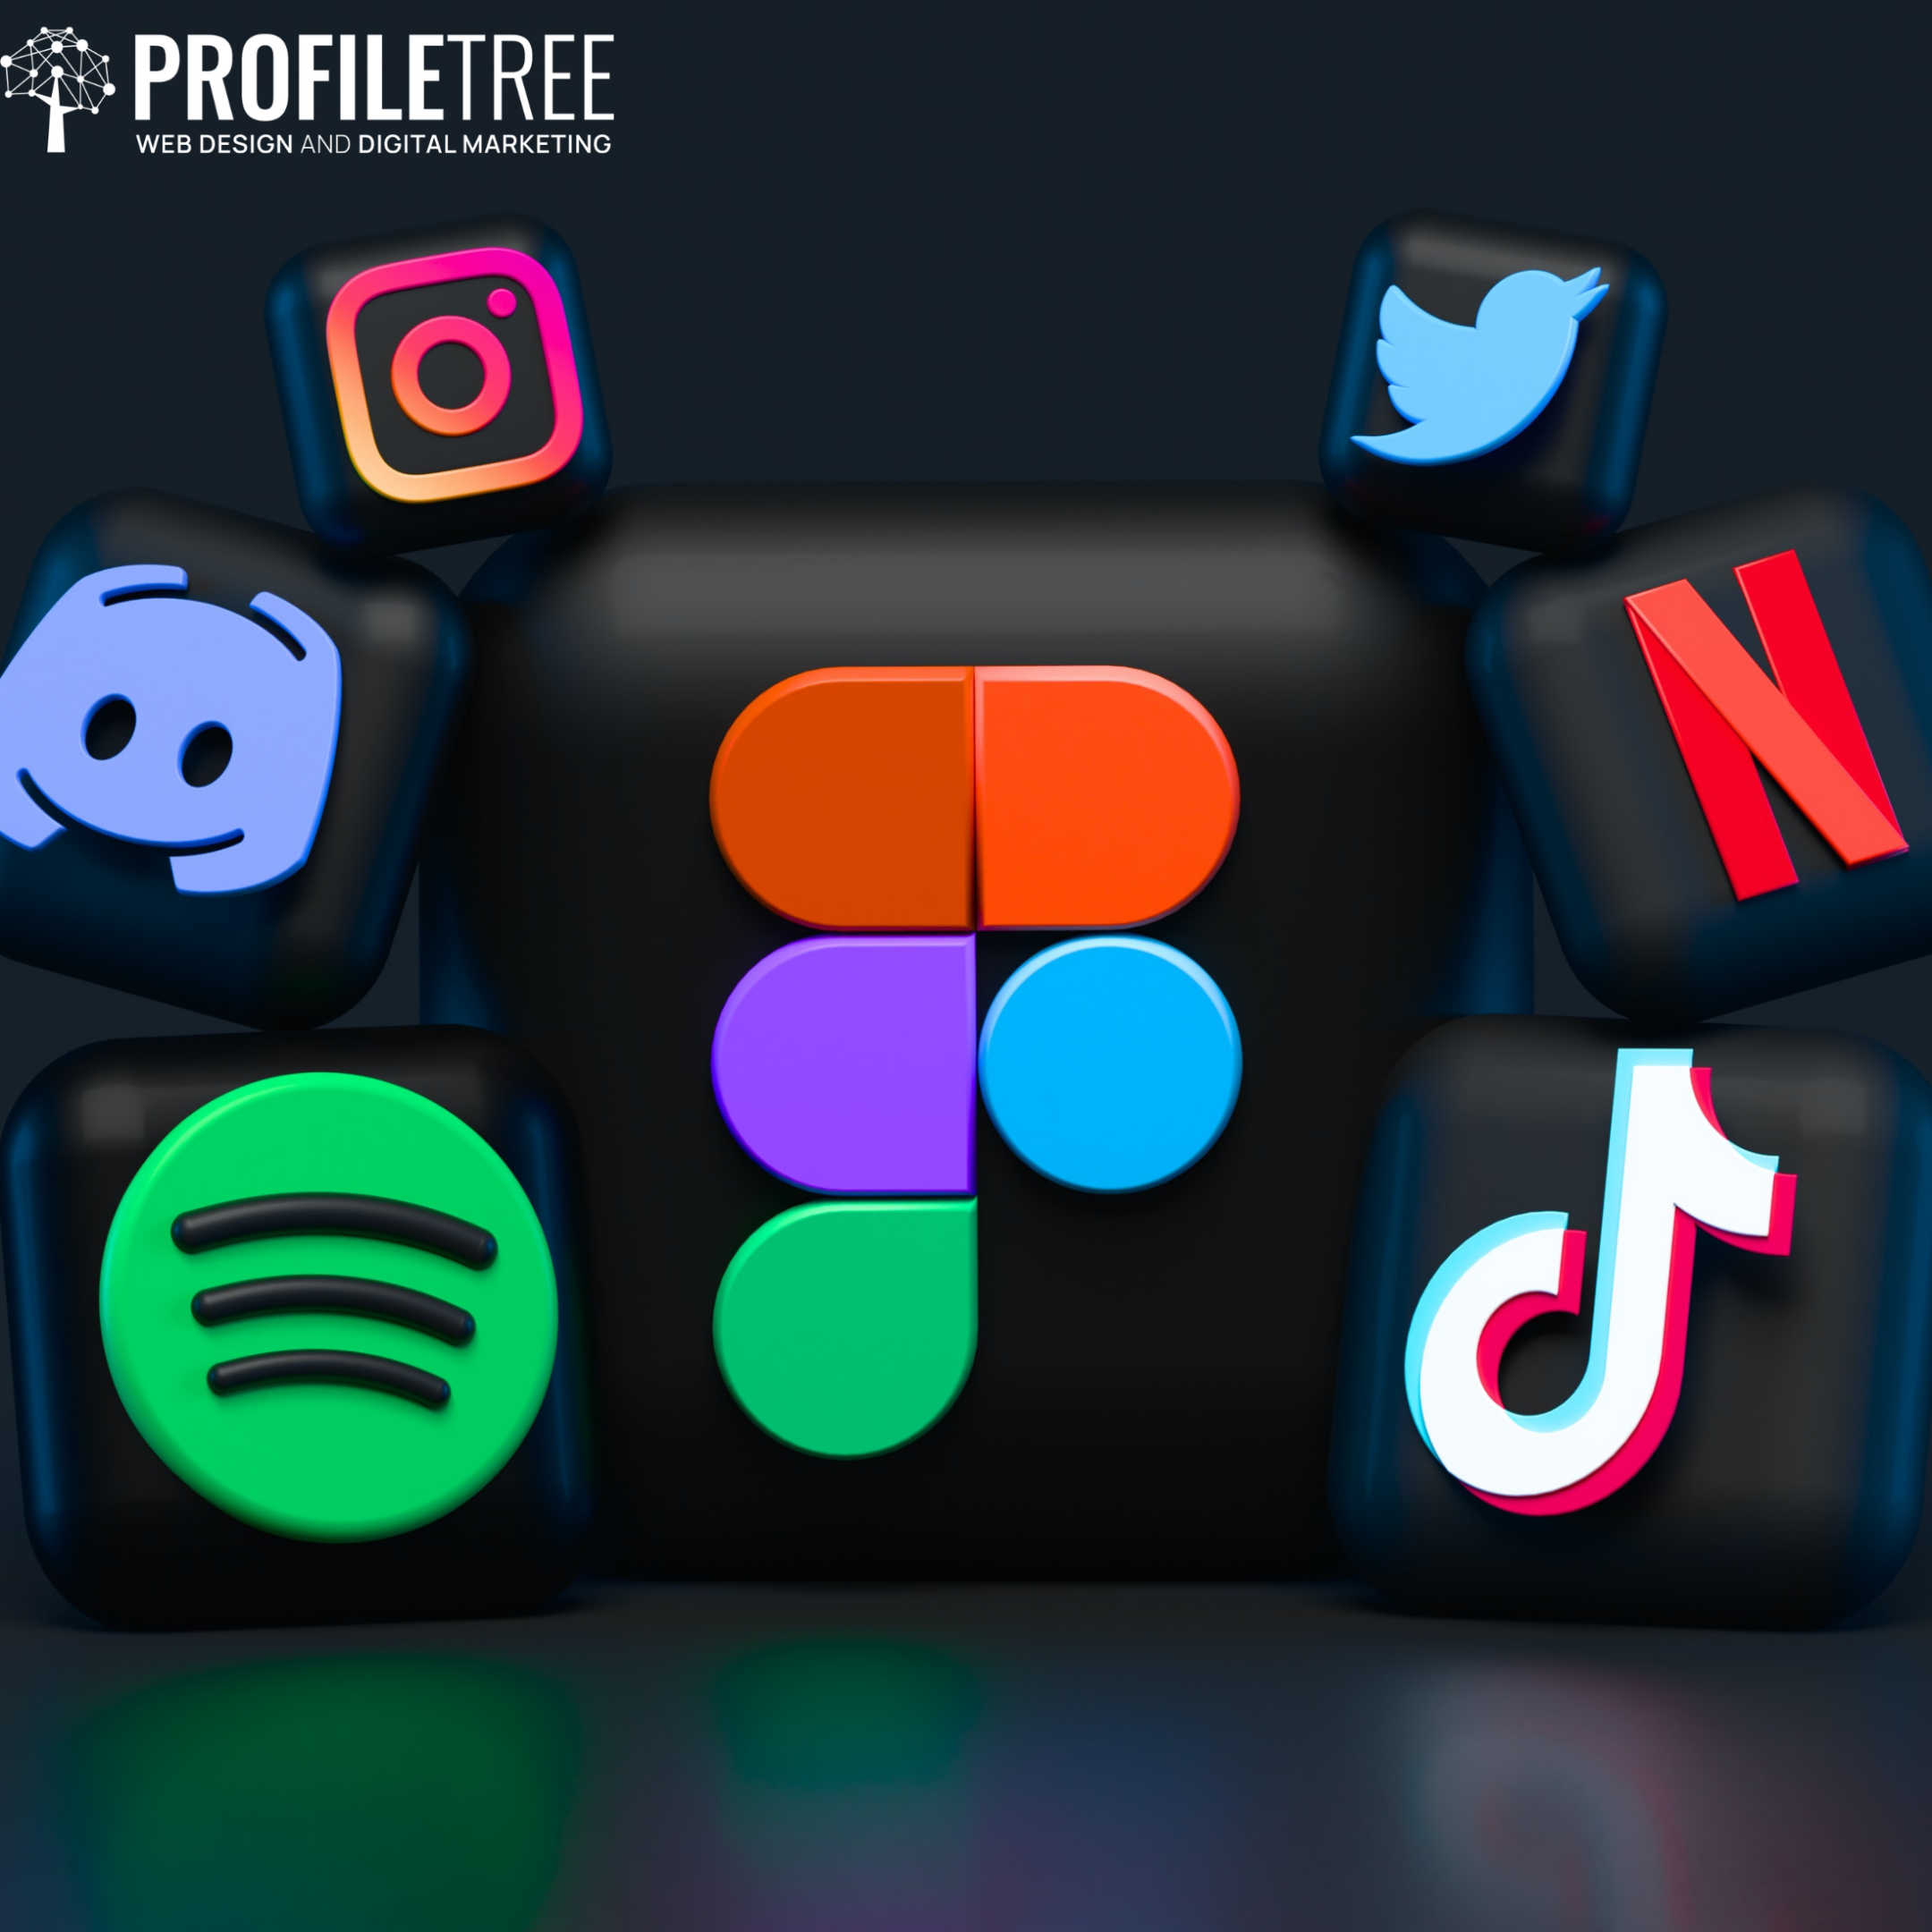 Image of multiple social media platform icons including instagram, twitter, tiktok, discord There are many social media platforms within digital marketing for small businesses; this, however, can make it difficult to manage for small businesses